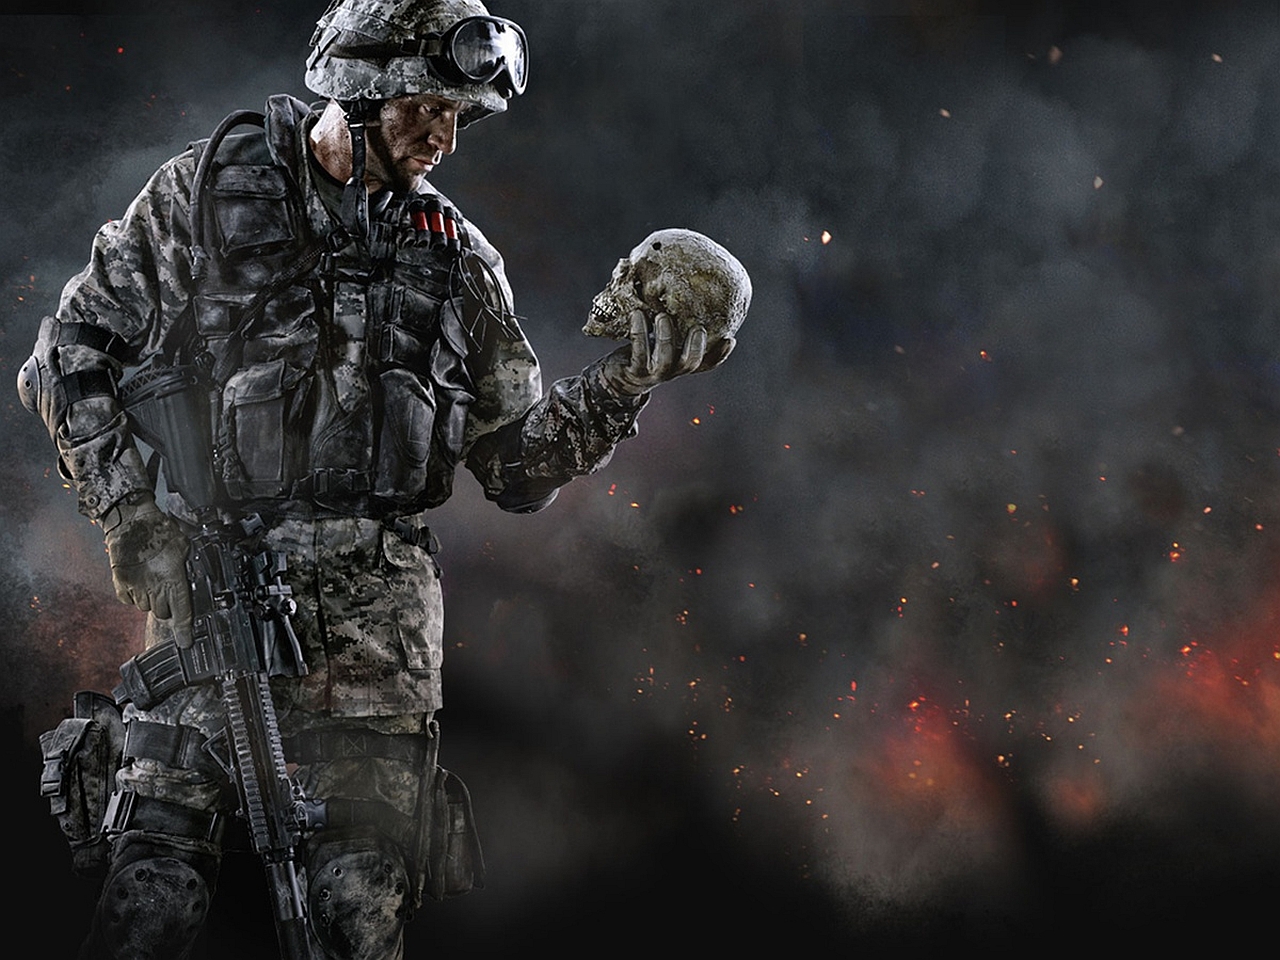 Cool military backgrounds